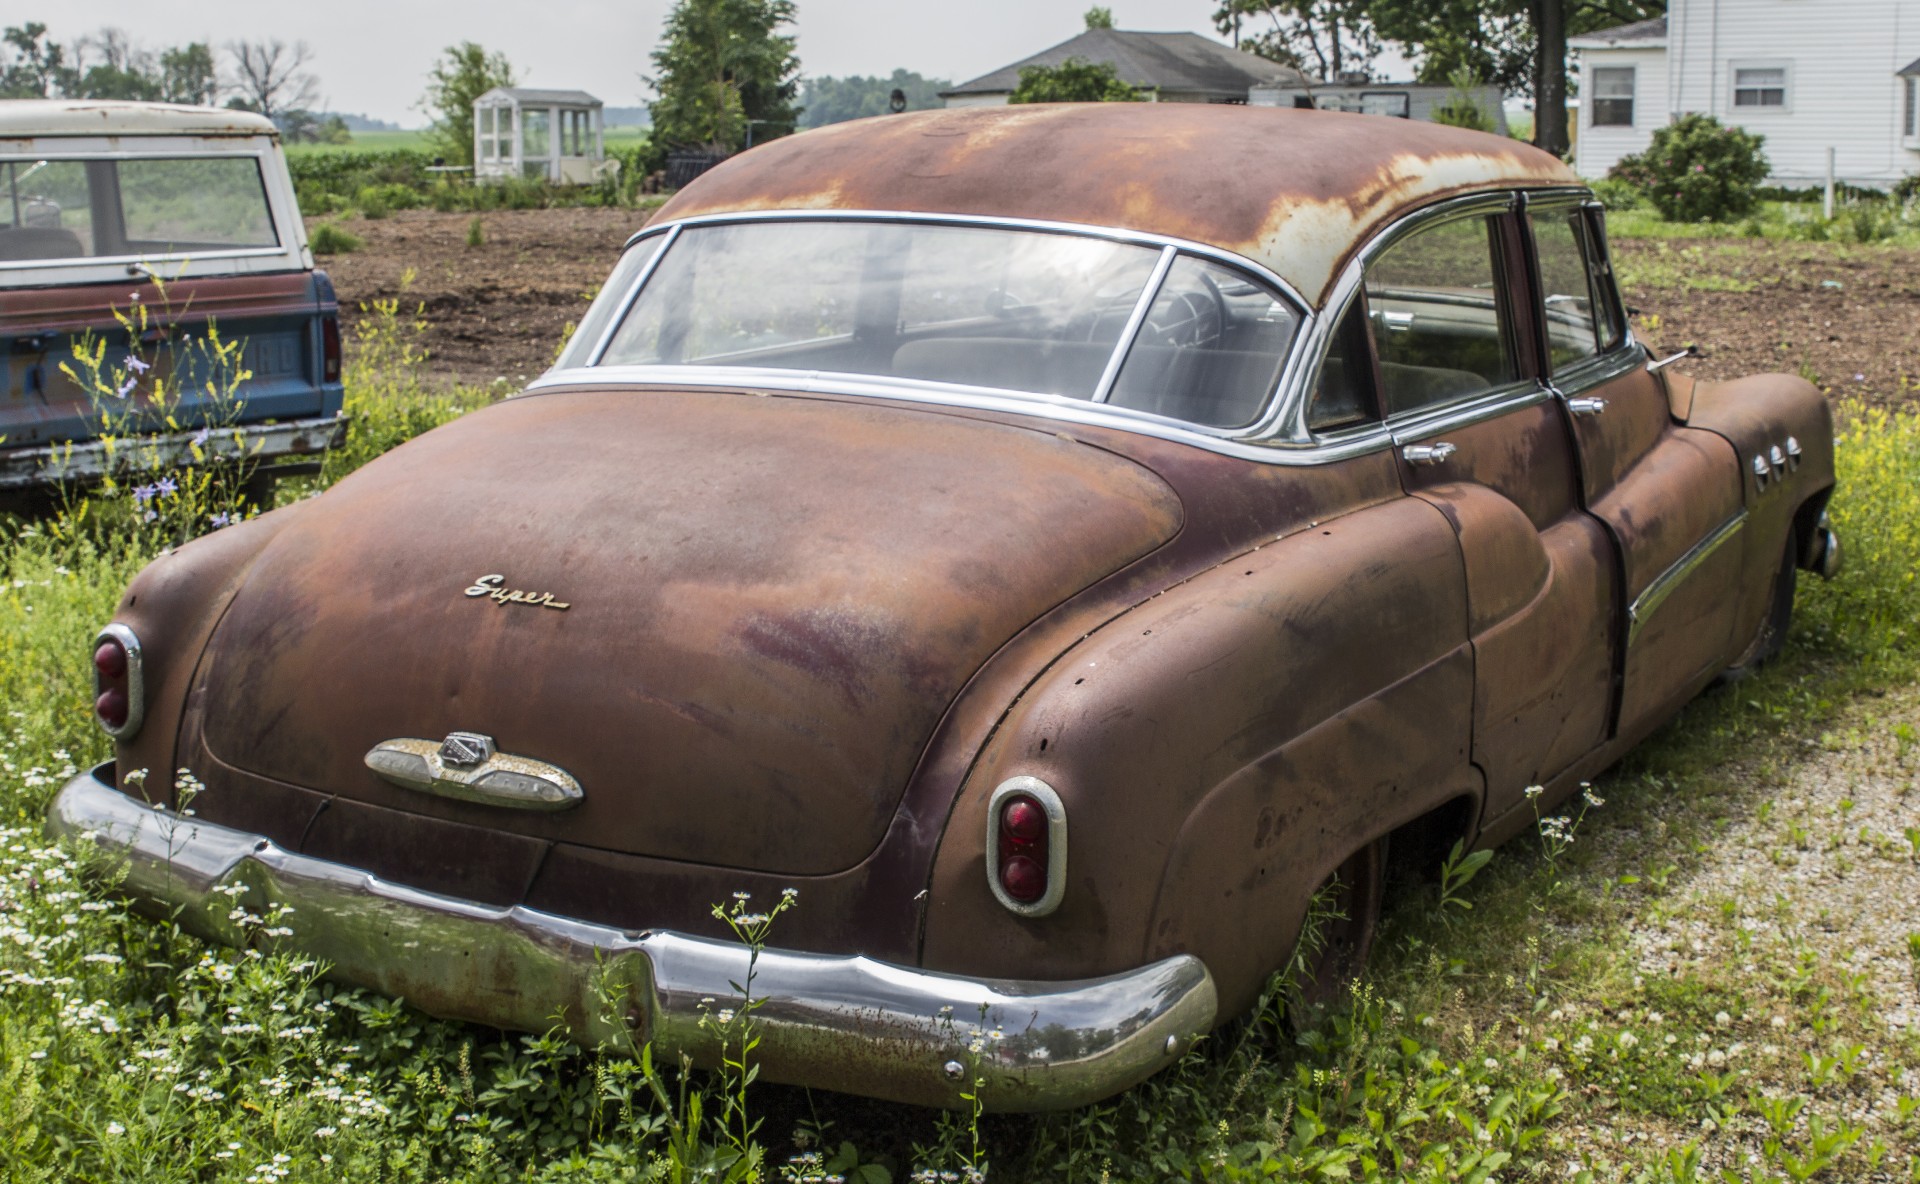 automobiles rural rural decay free photo